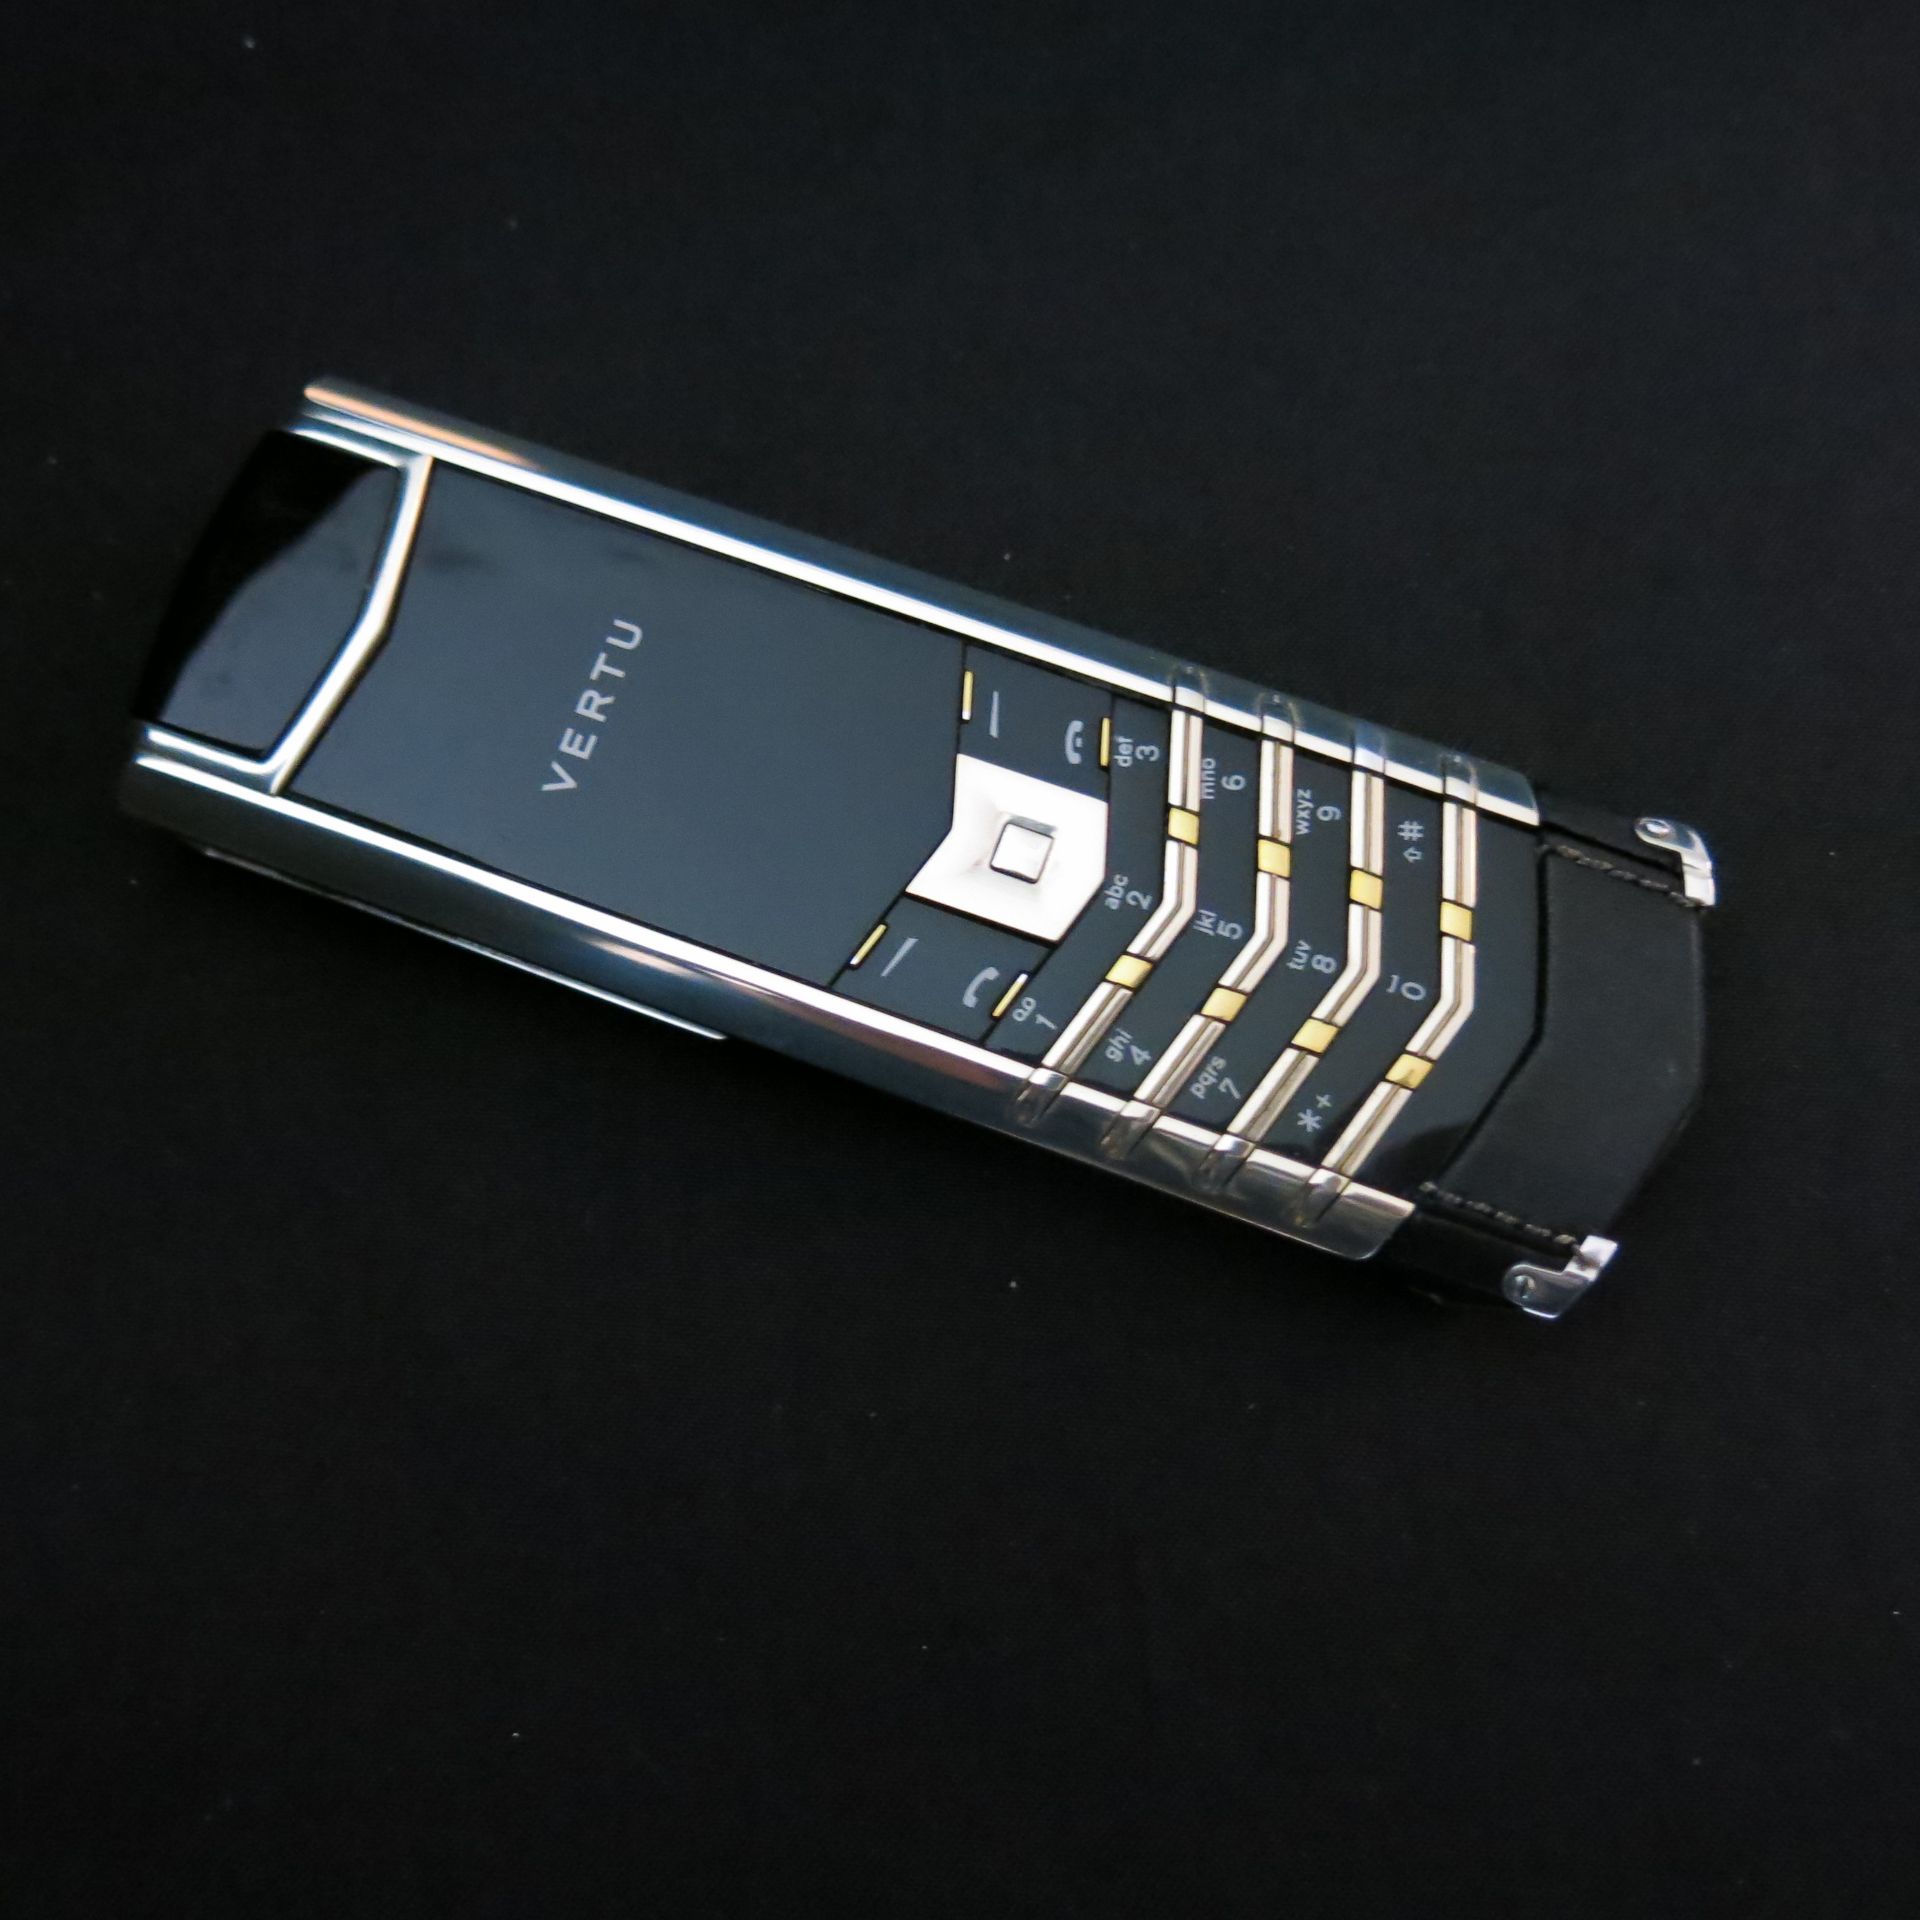 Entire Contents of the VERTU Museum Collection to Include: 105 Various Iconic Phones & Appearance - Image 106 of 106